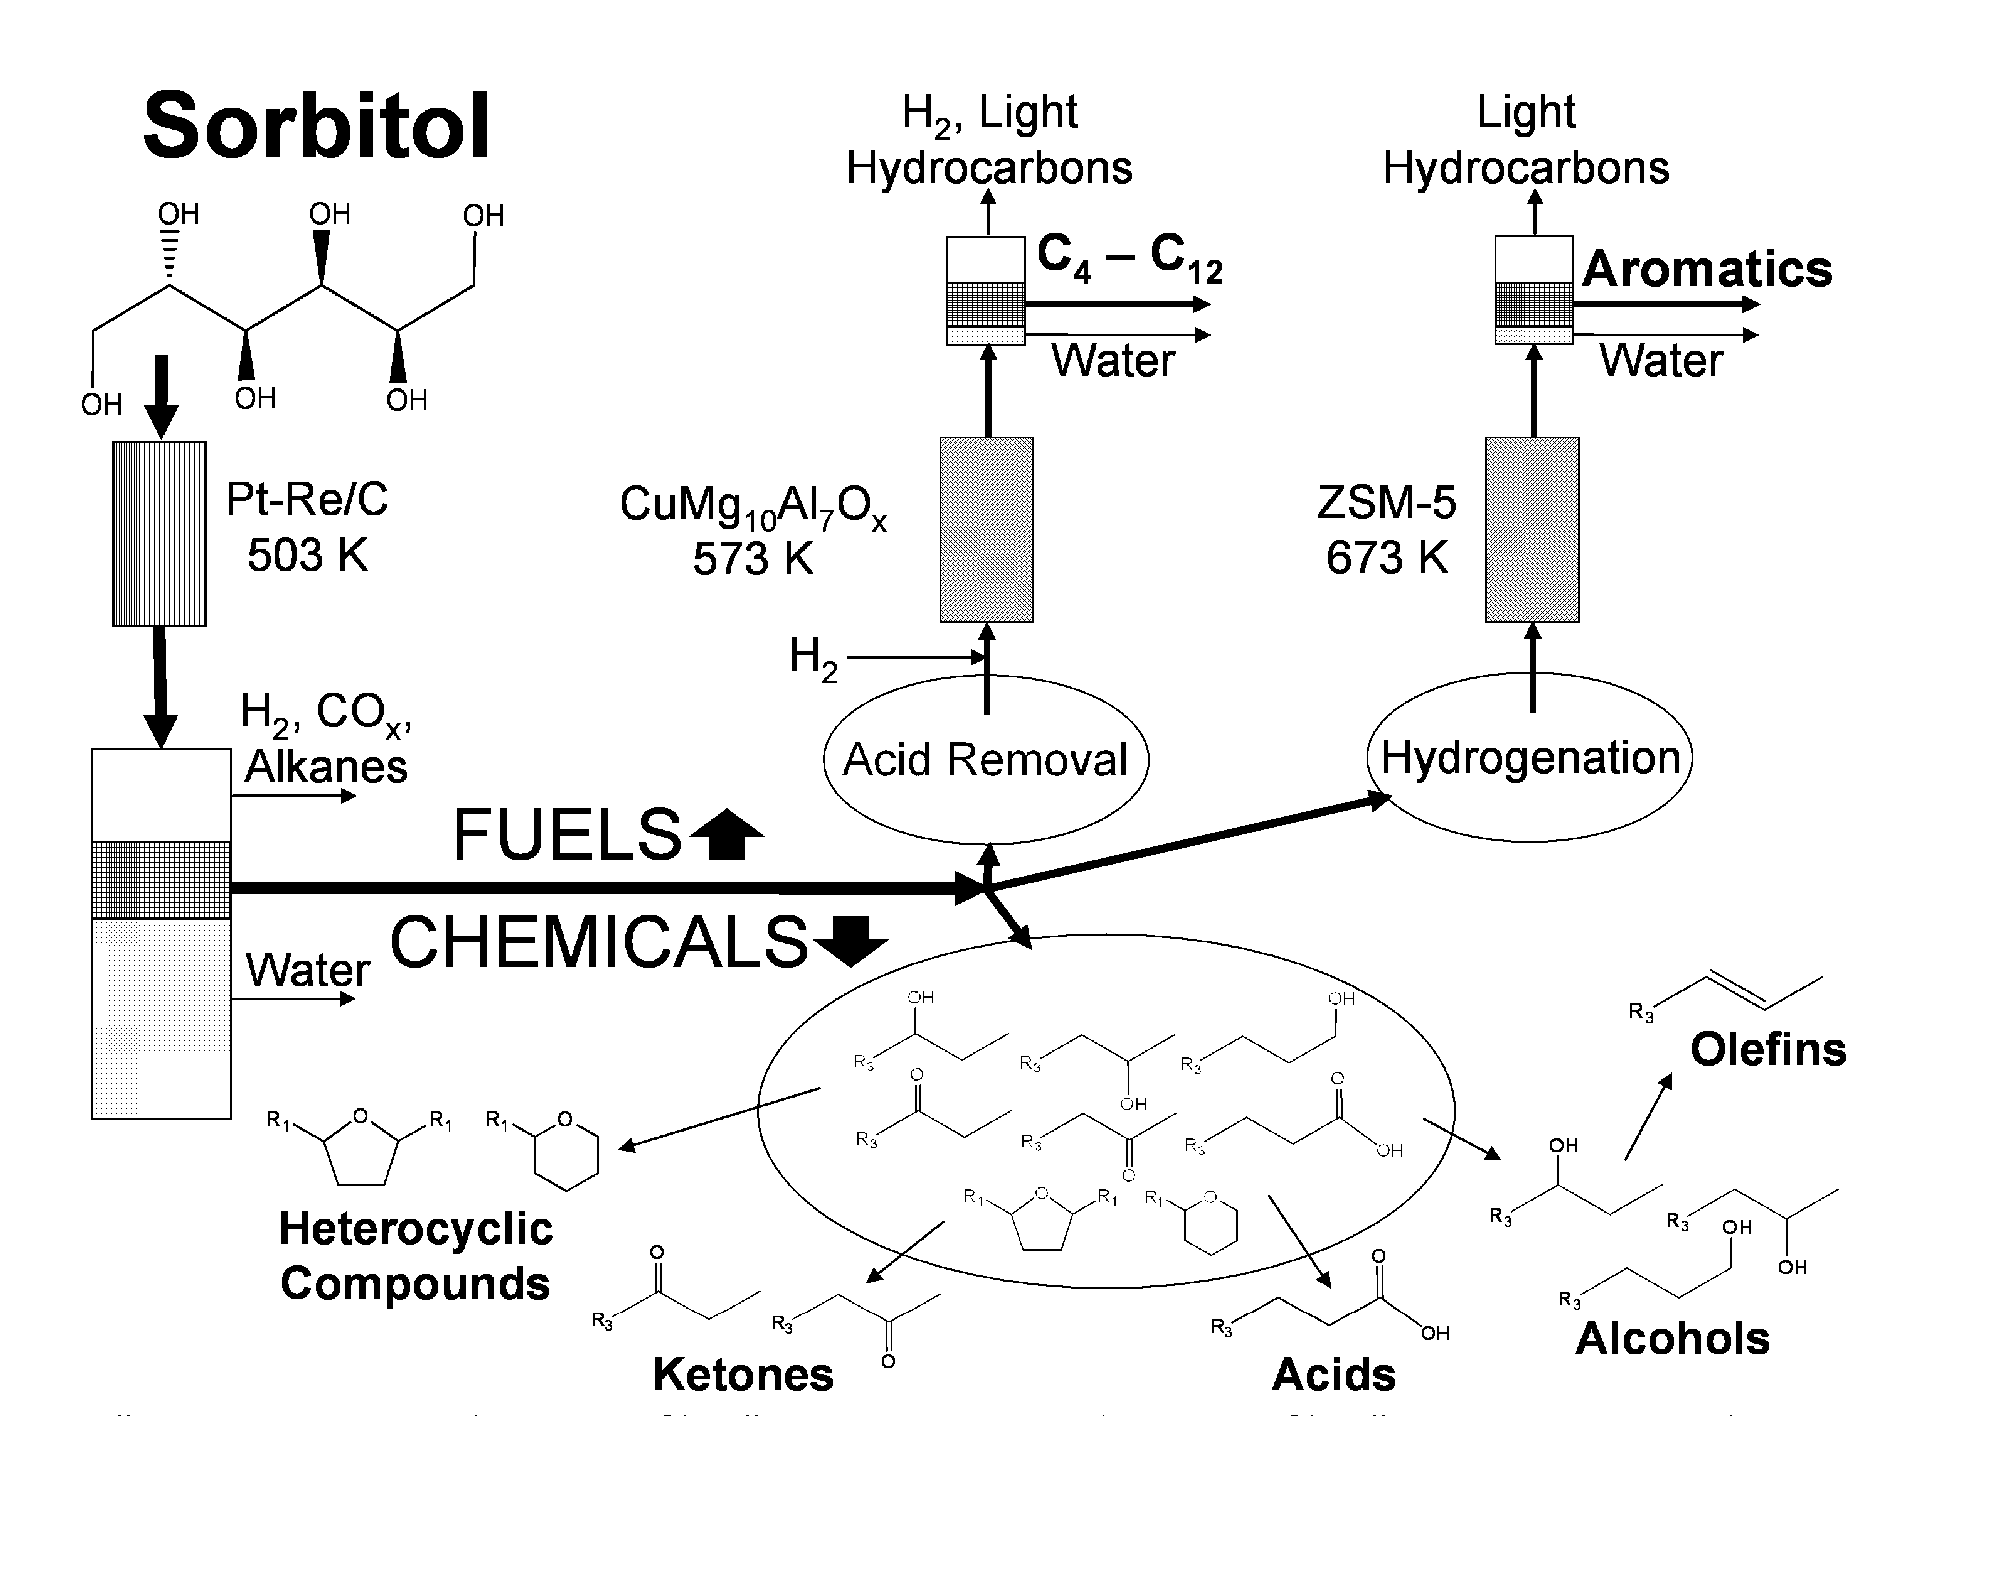 Single-reactor process for producing liquid-phase organic compounds from biomass